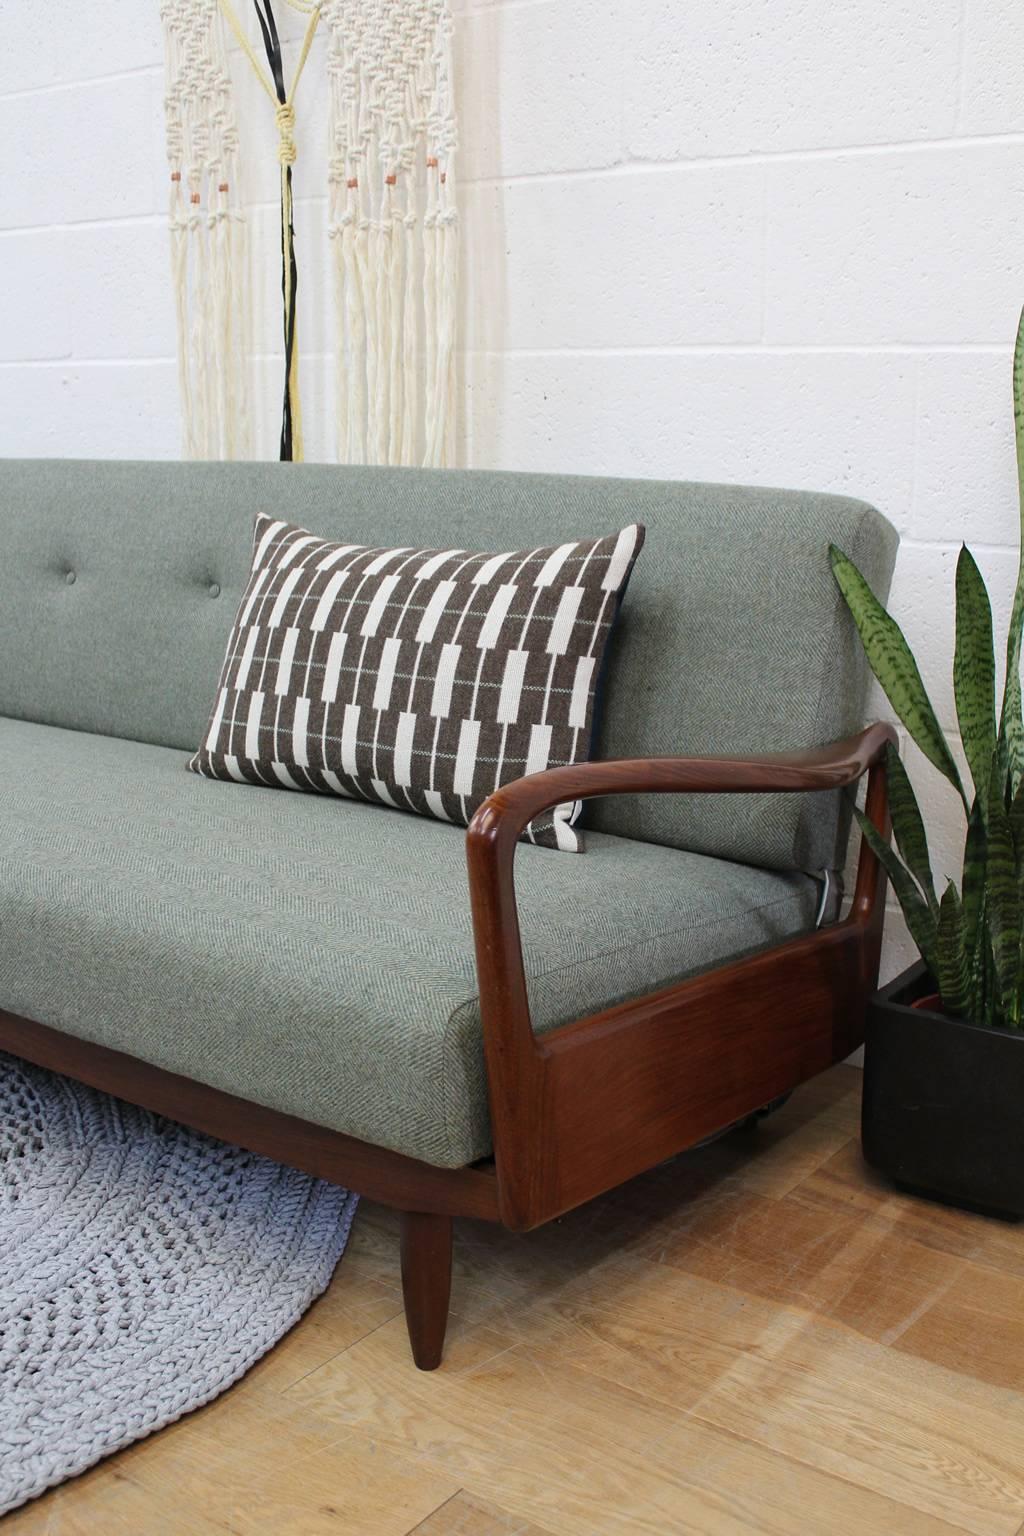 20th Century Greaves & Thomas Midcentury Sofa Bed with Teak Arms, Fully Restored in Wool